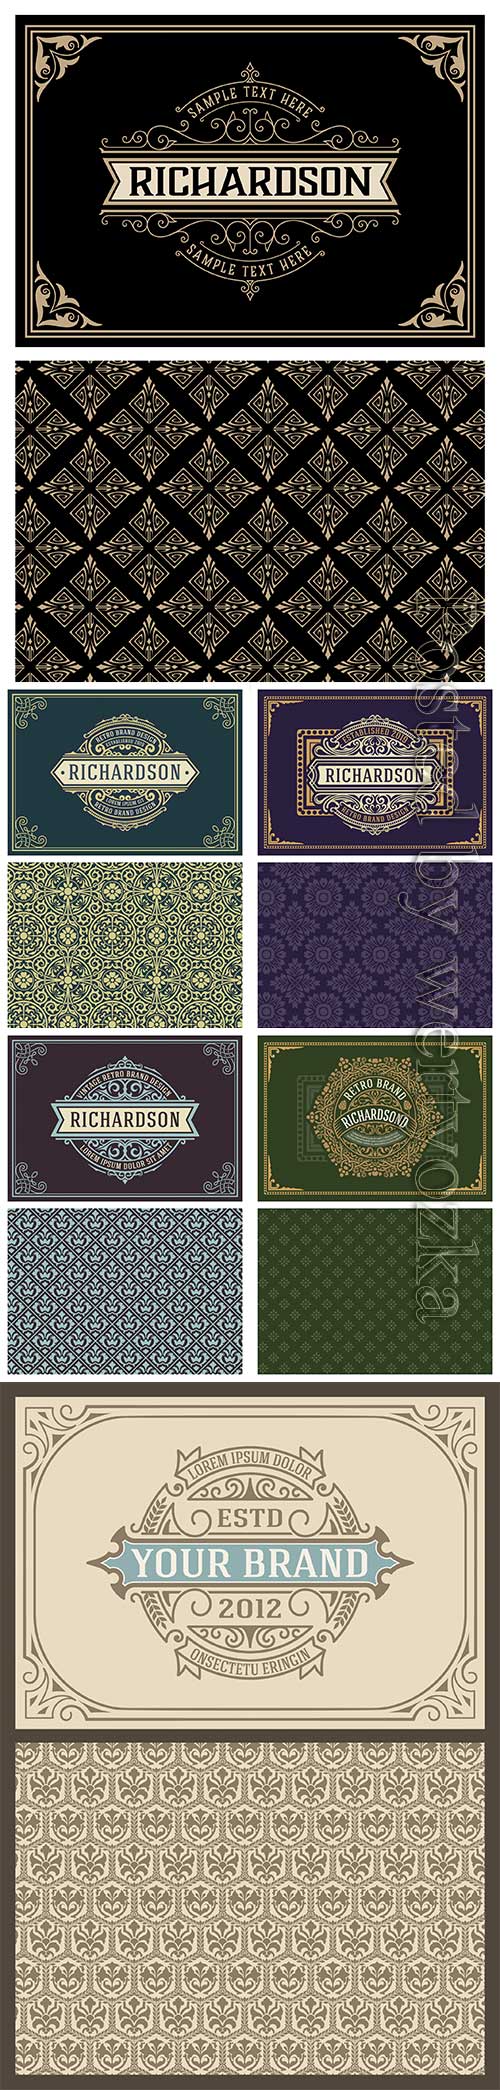 Vintage greeting vector card with ornate swirls and retro background templa ...